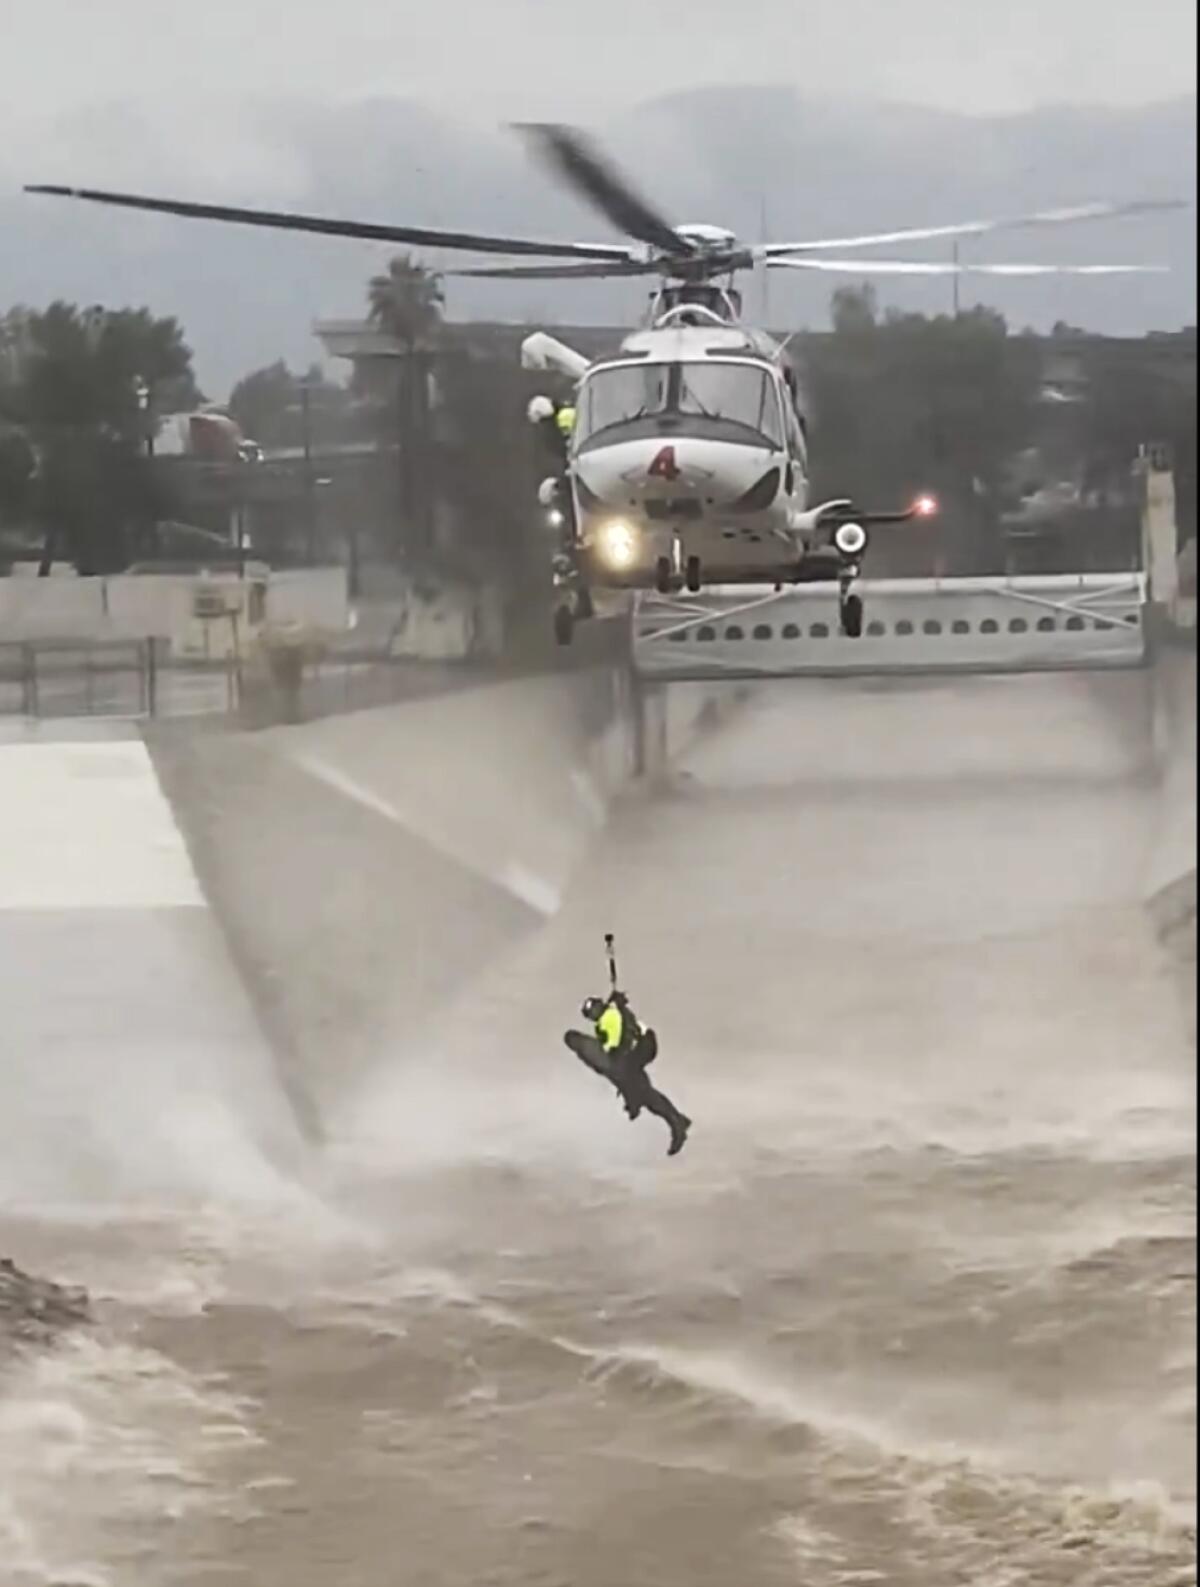 A person dangles from a helicopter over choppy waters within the concrete walls of a manmade river.